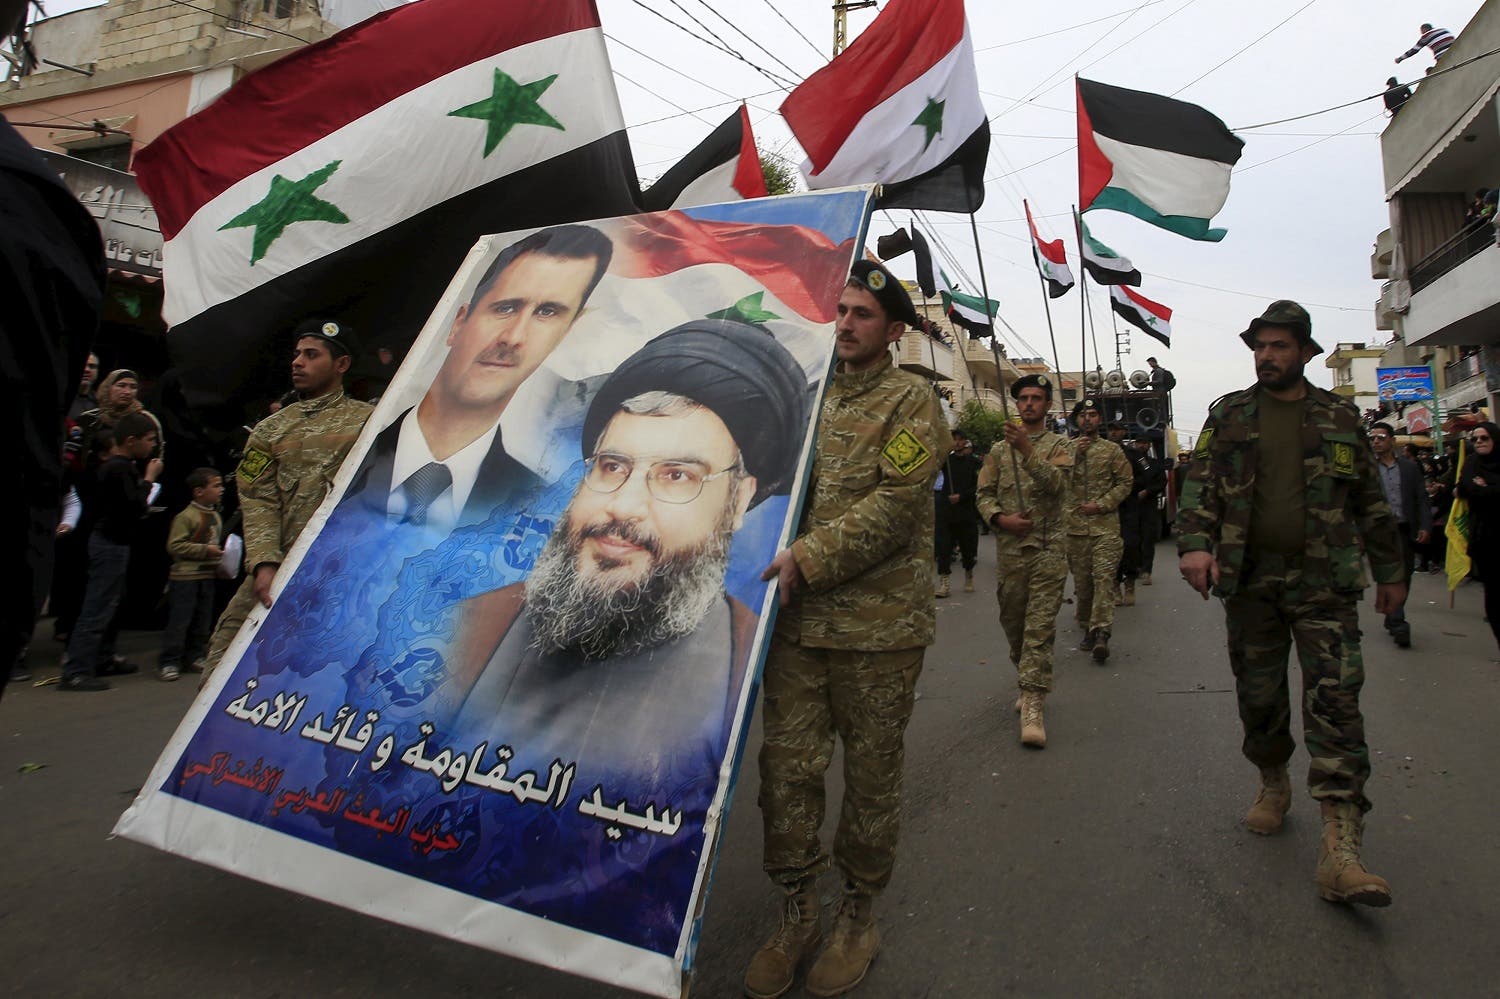 Members of the Arab Socialist Baath Party carry a picture depicting Syria's President Bashar al-Assad and Hezbollah leader Hassan Nasrallah. (Reuters)